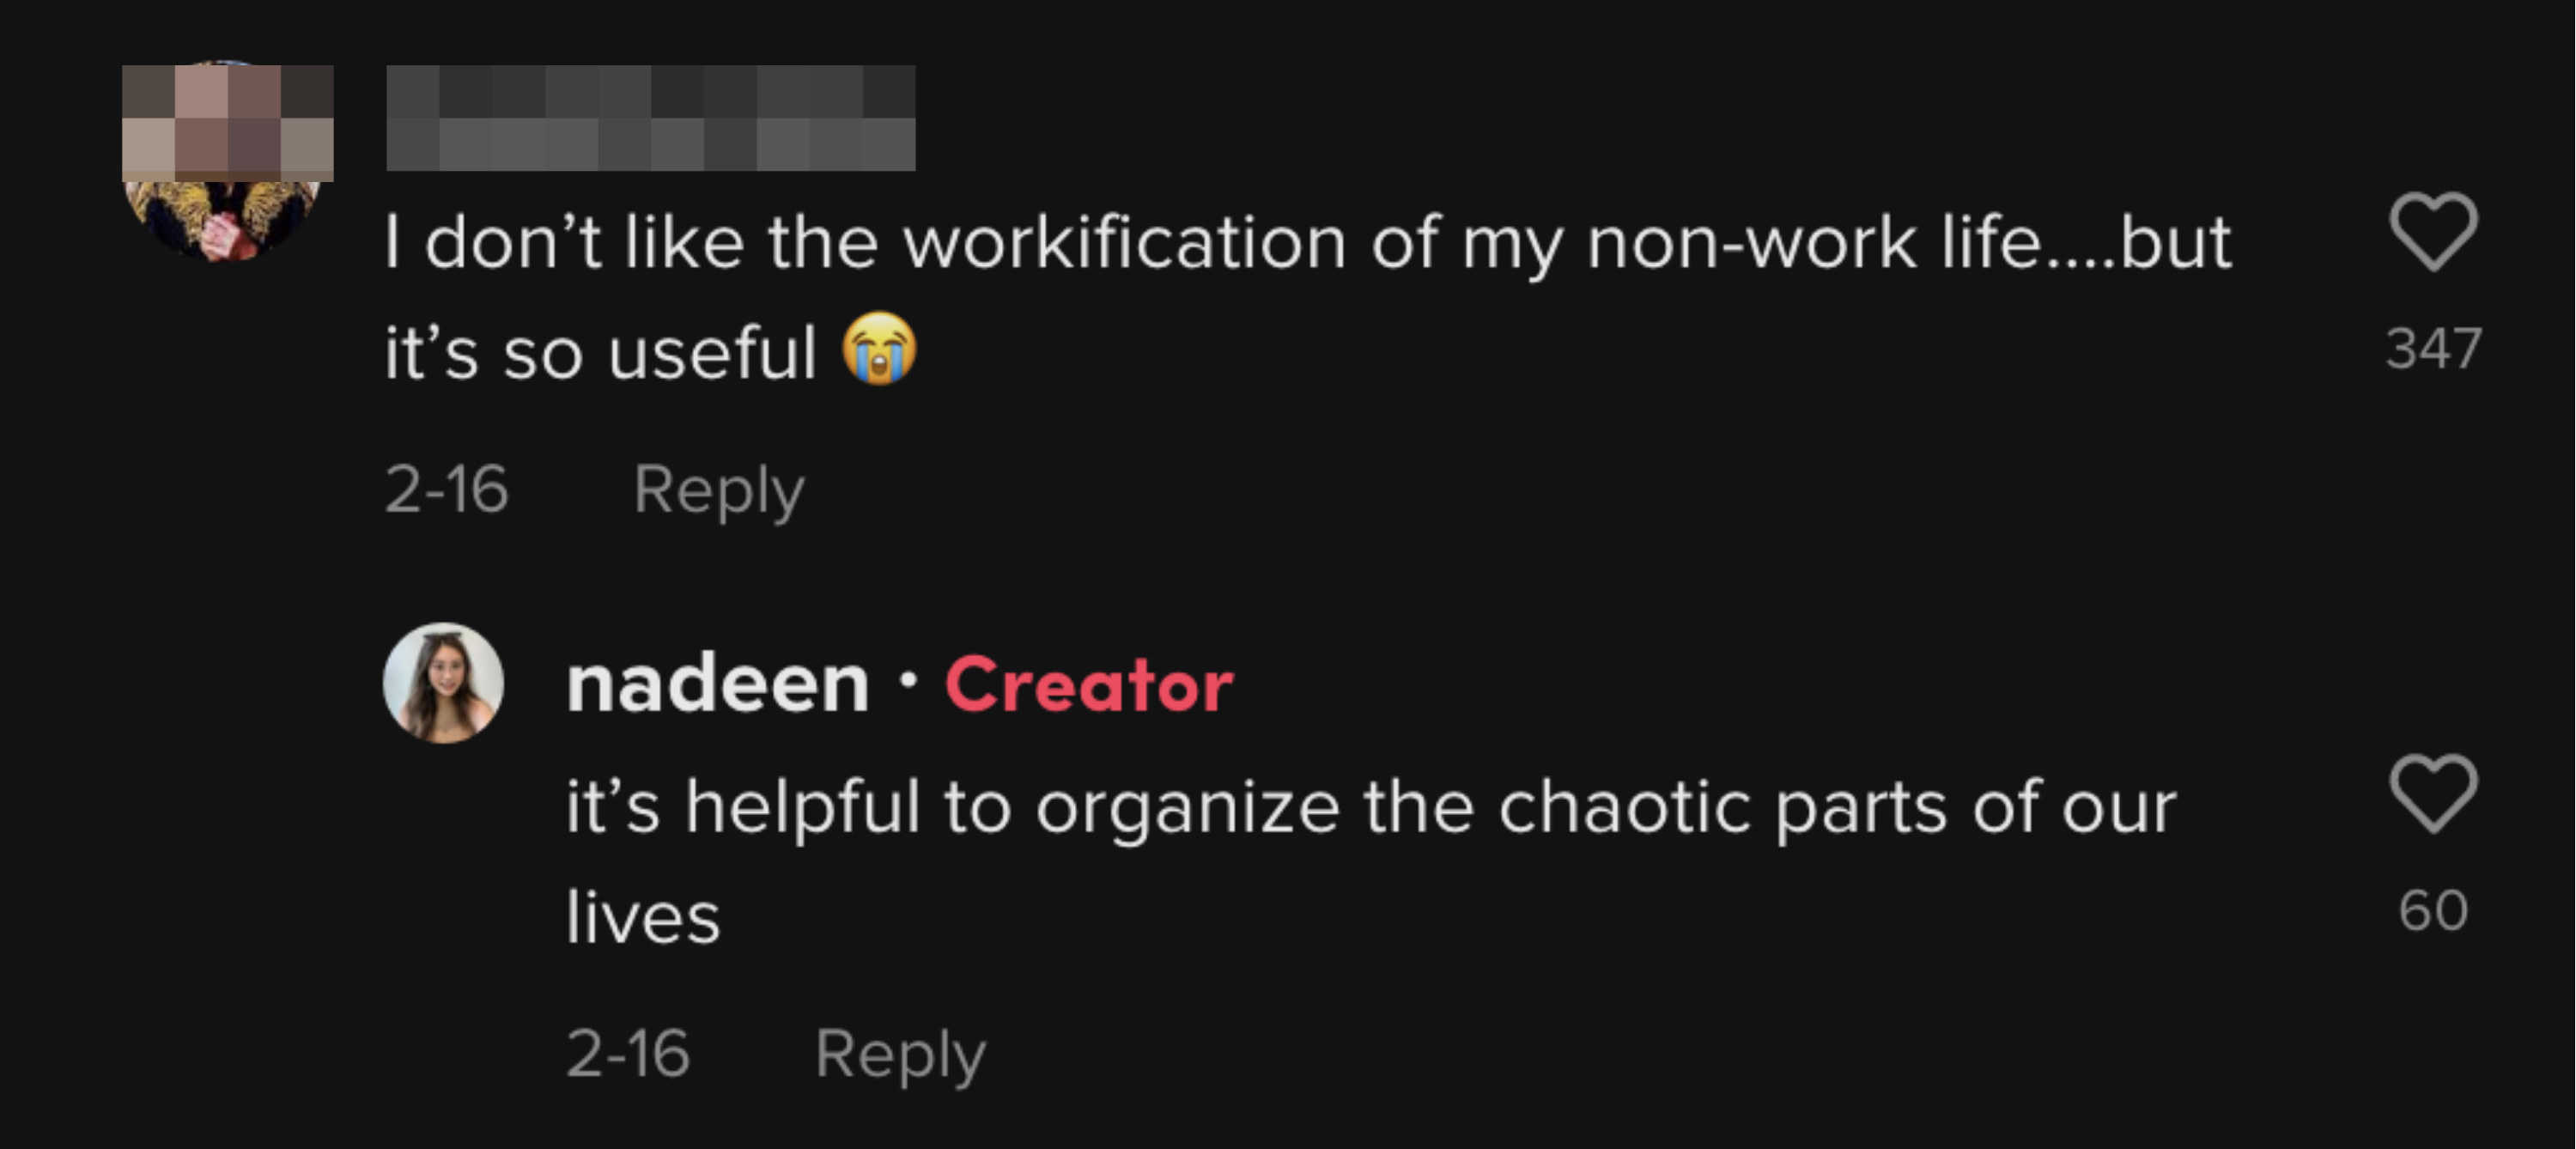 One person said &quot;I don&#x27;t like the workification on my non-work life....but it&#x27;s so useful [cyring, laughing emoji] to which Nadeen replied, &quot;it&#x27;s helpful to organize the chaotic parts of our lives&quot;